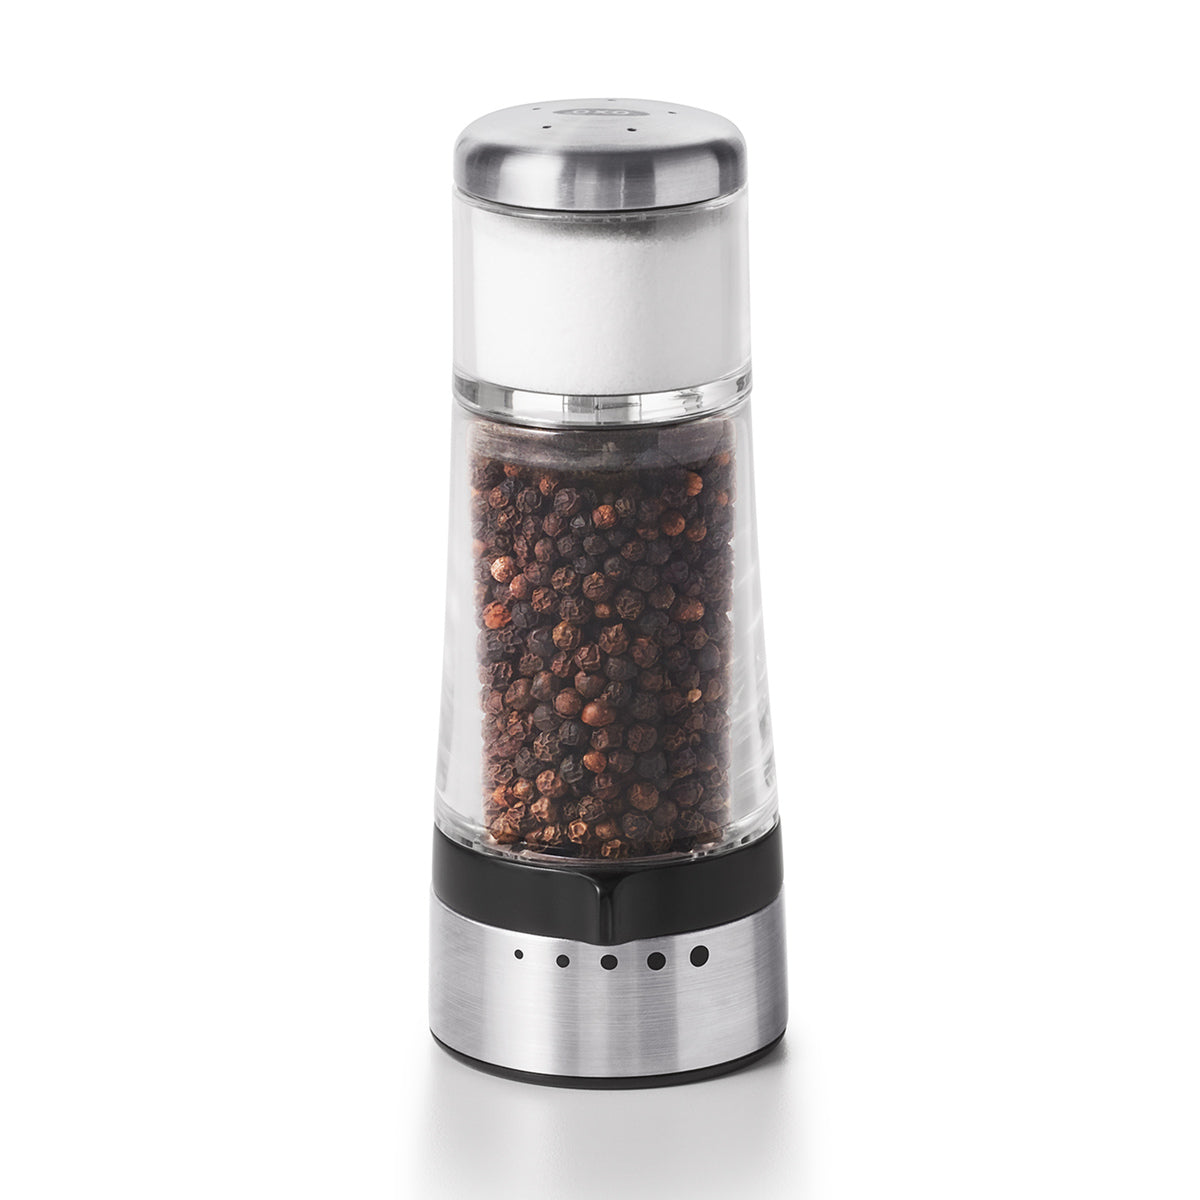 2X Electric Pepper Salt Grinder Mill Operated LED Light Battery